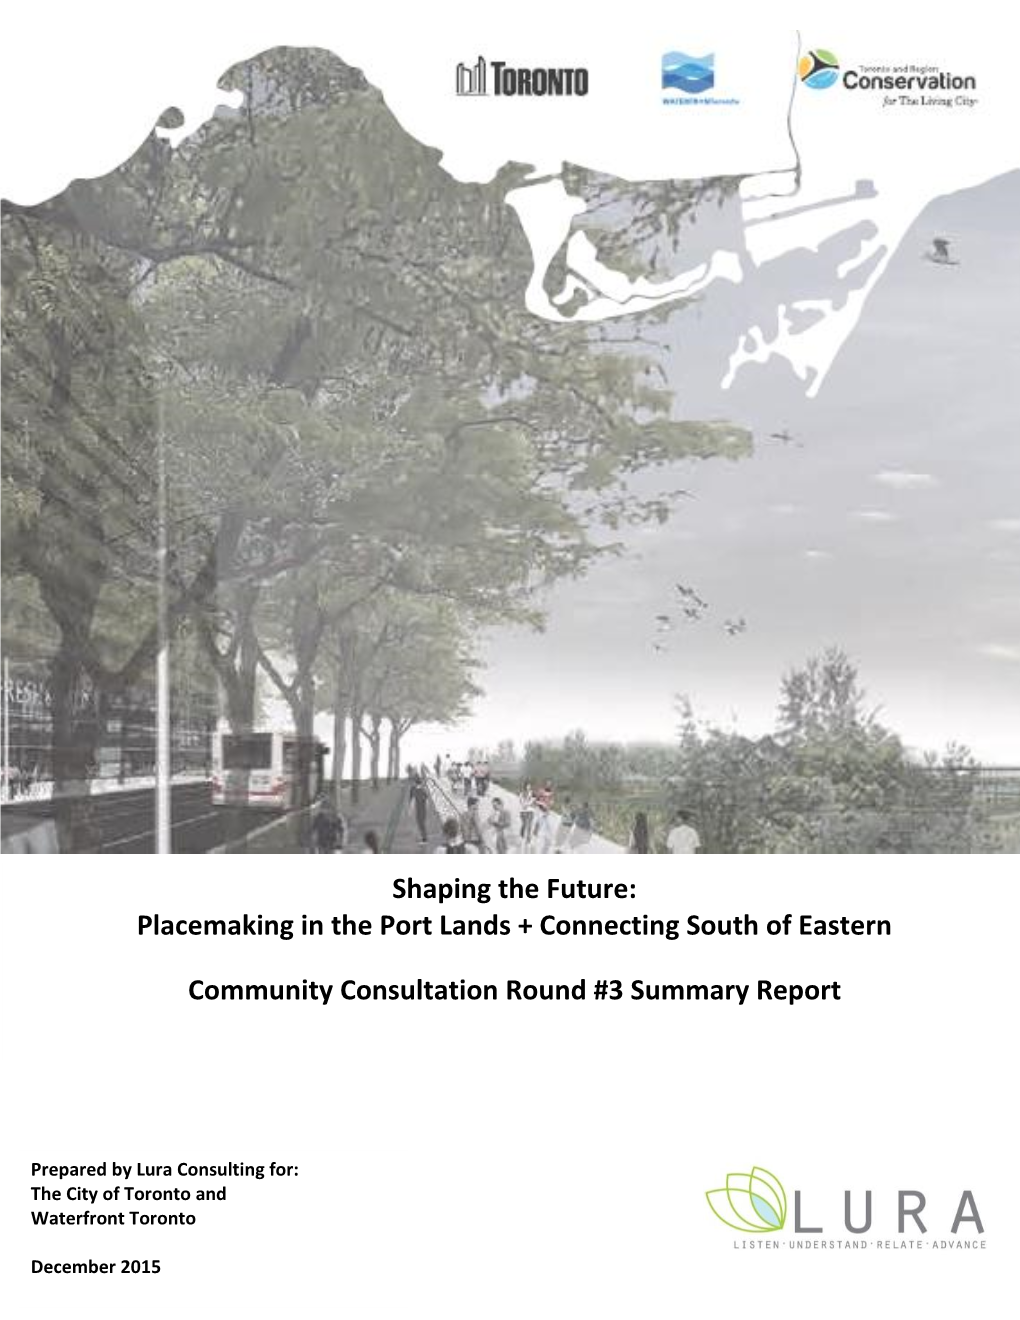 Shaping the Future: Placemaking in the Port Lands + Connecting South of Eastern